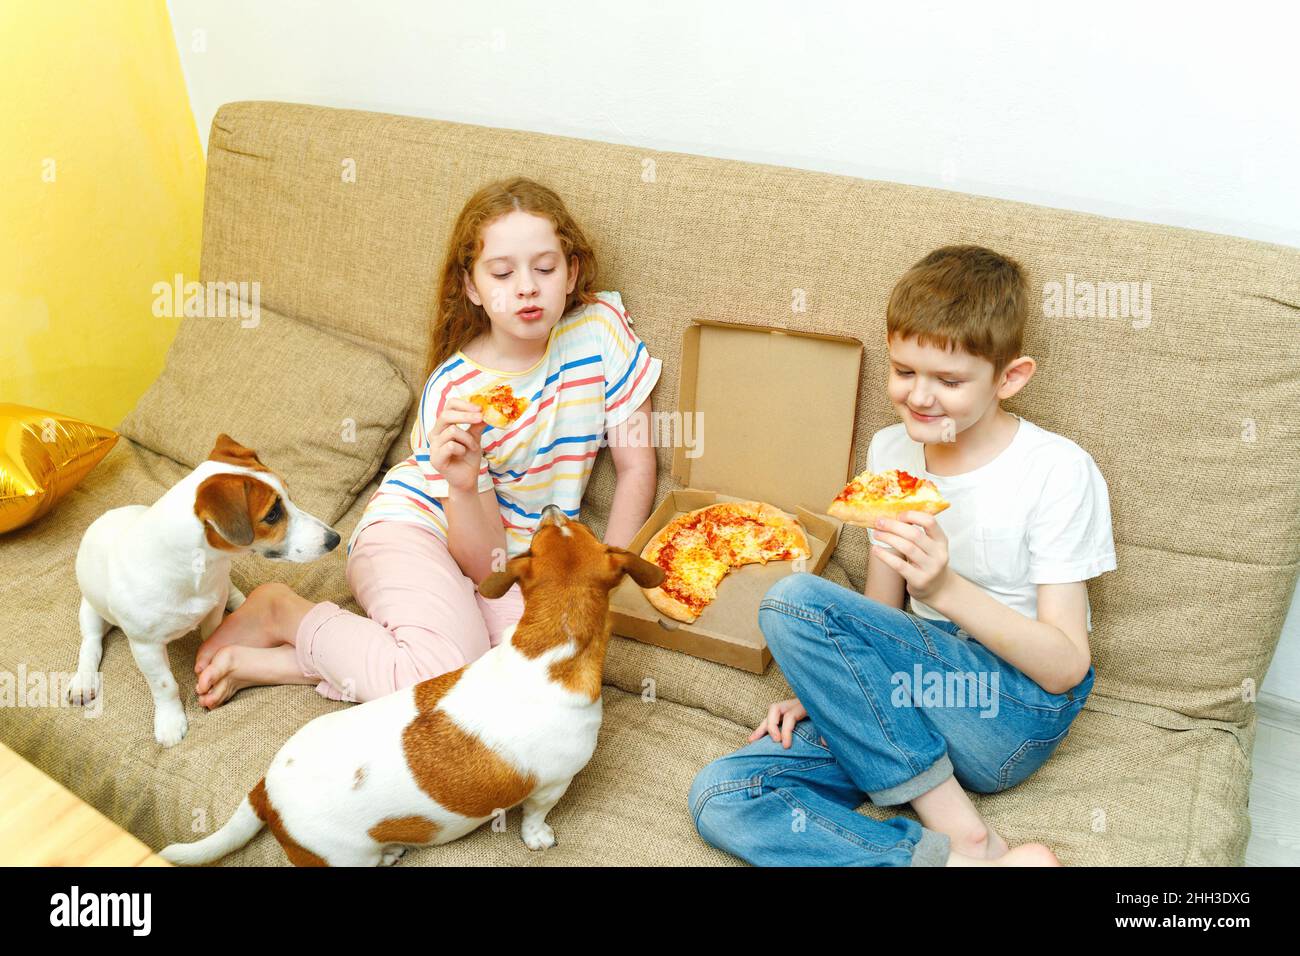 Child eating pizza at home, dog  begging for pizza. Friends eat pizza together at home. Stock Photo